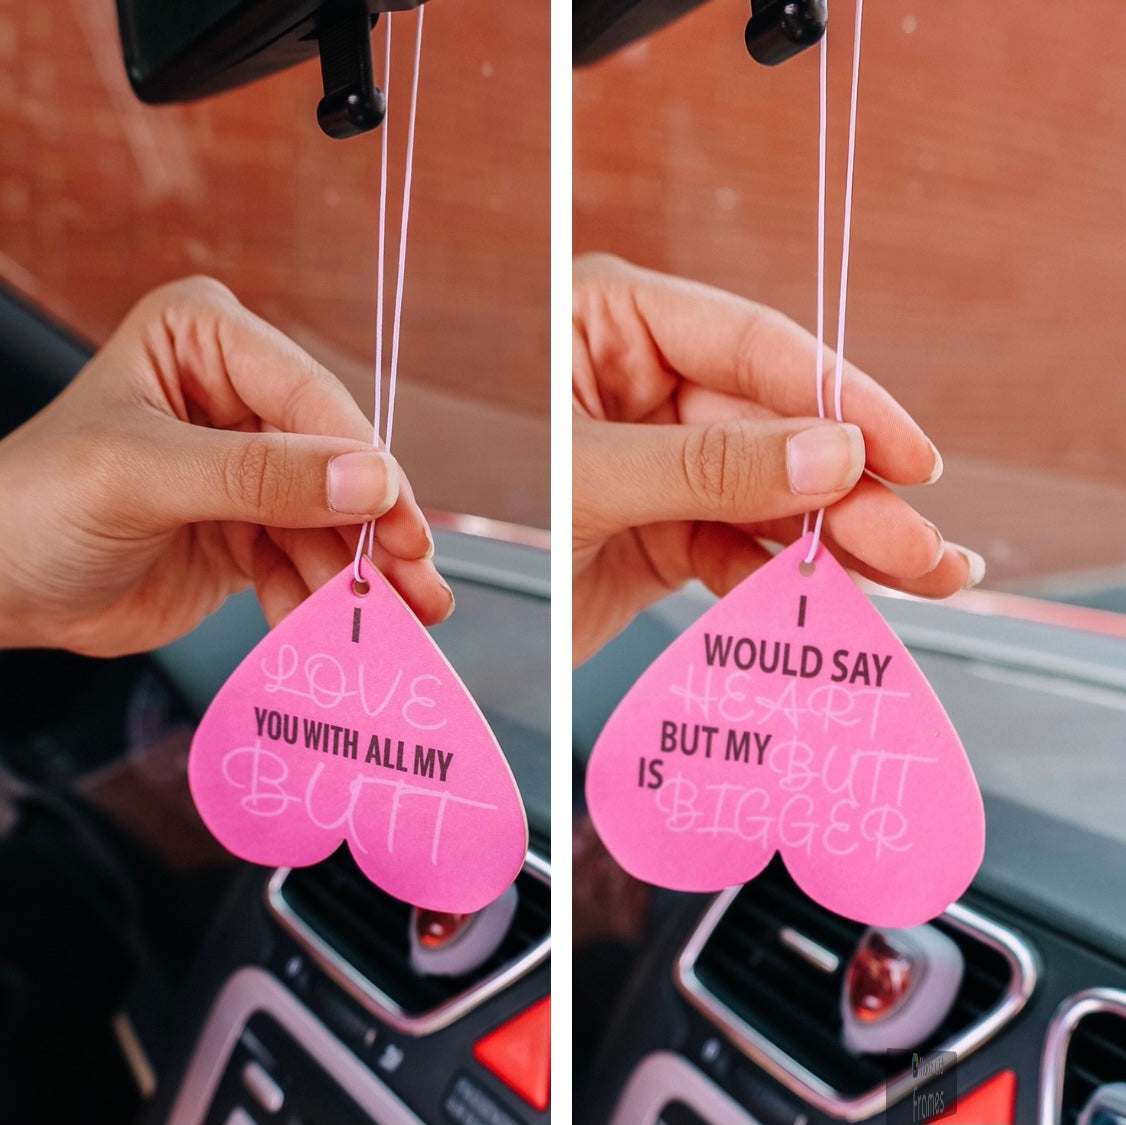 I Love You With All My Butt Air Freshener